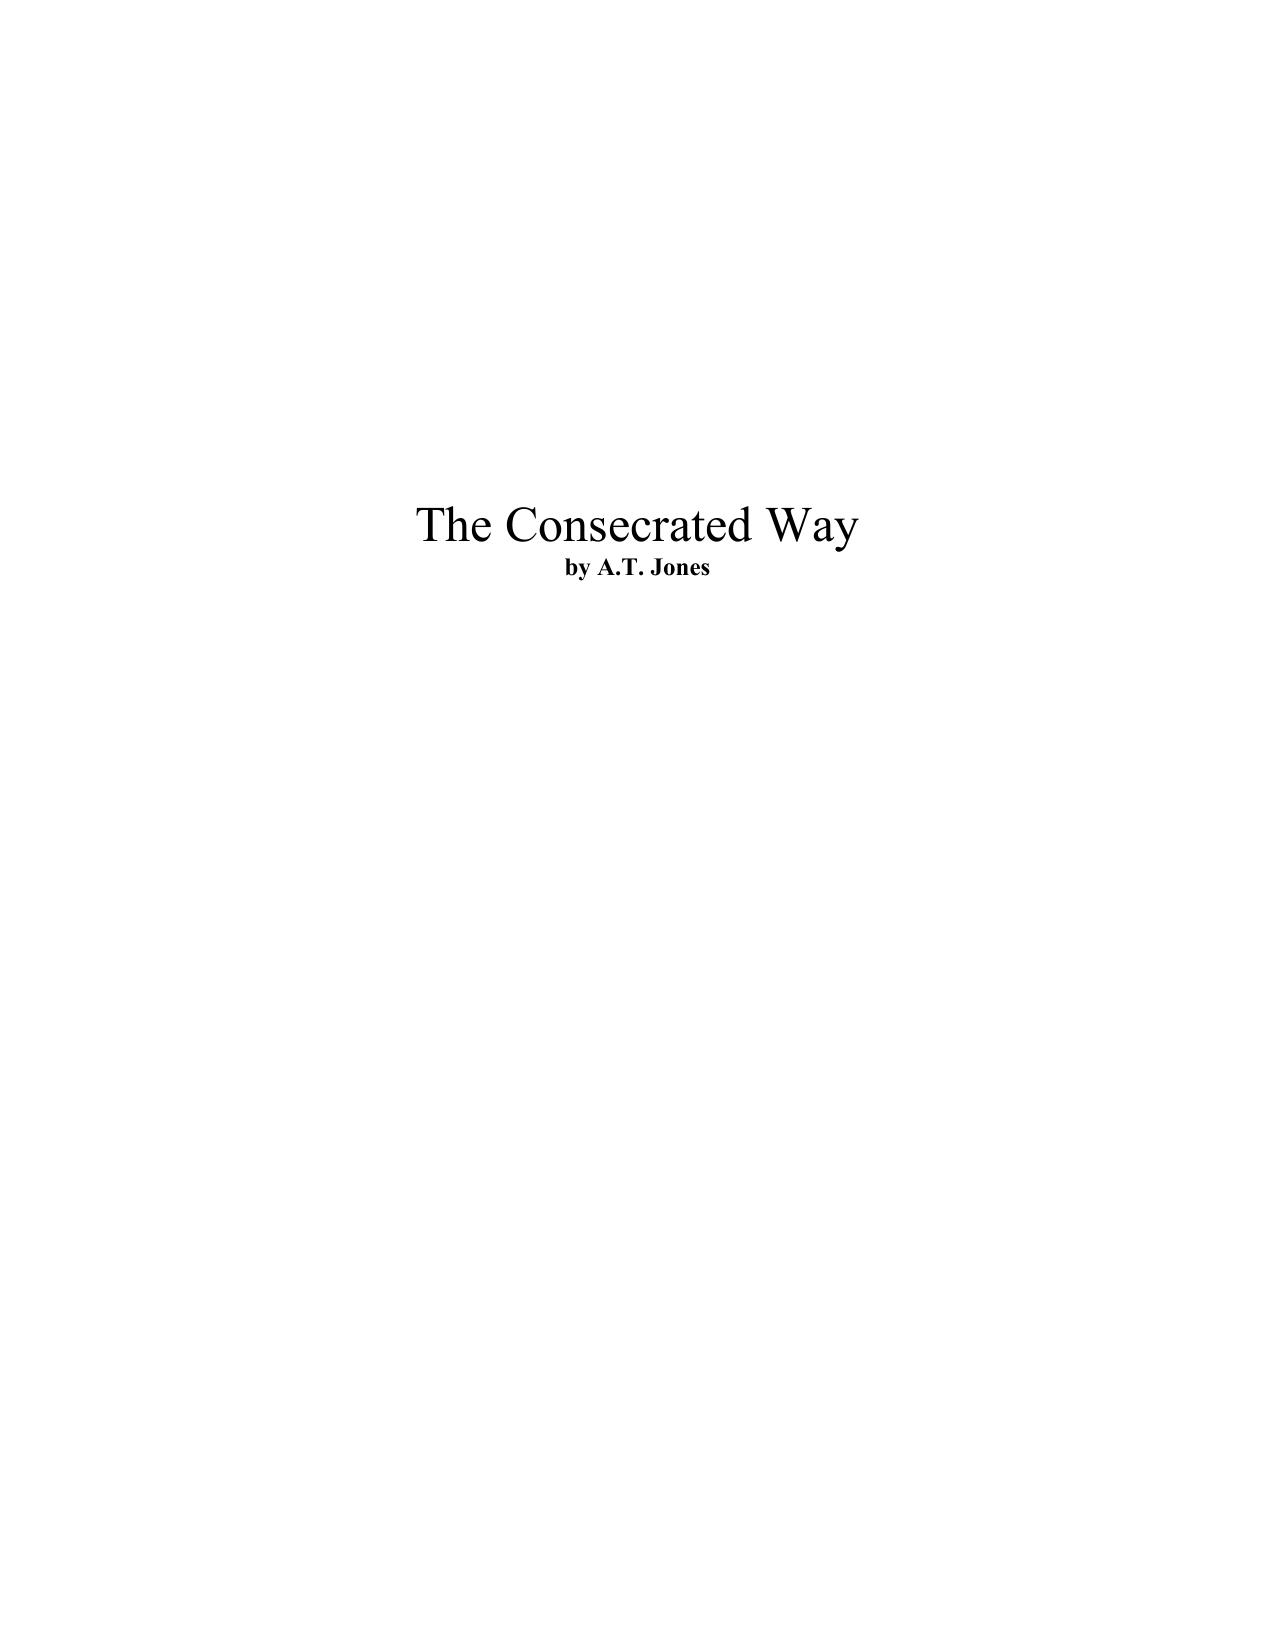 The Consecrated Way by Adrian Ebens